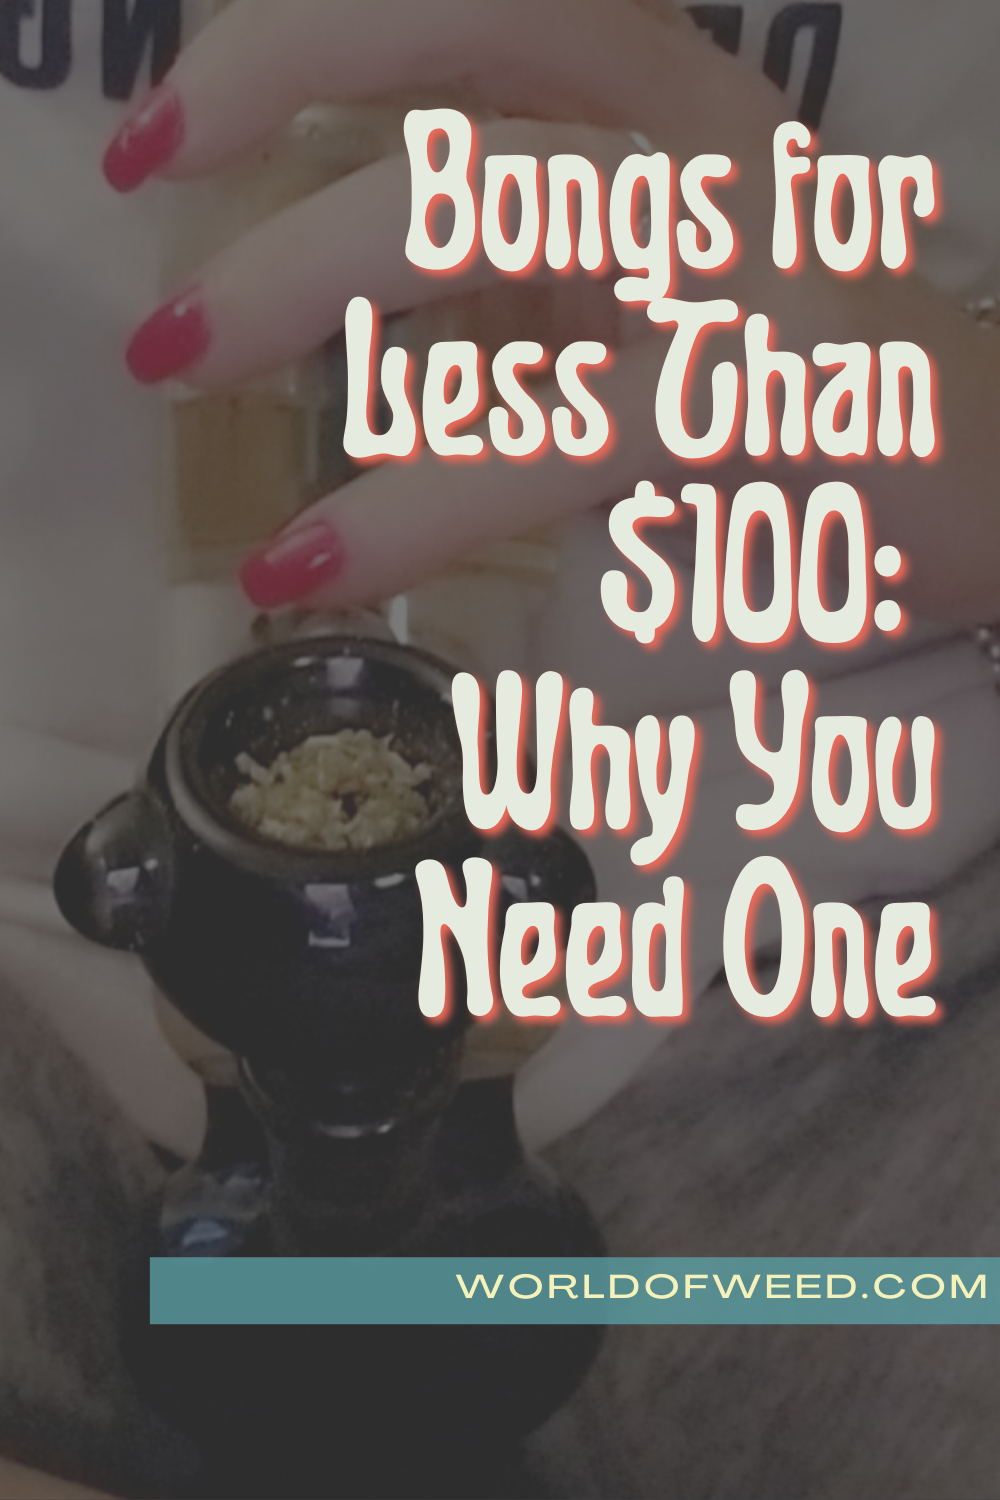 Bongs for Less Than $100: Why You Need One